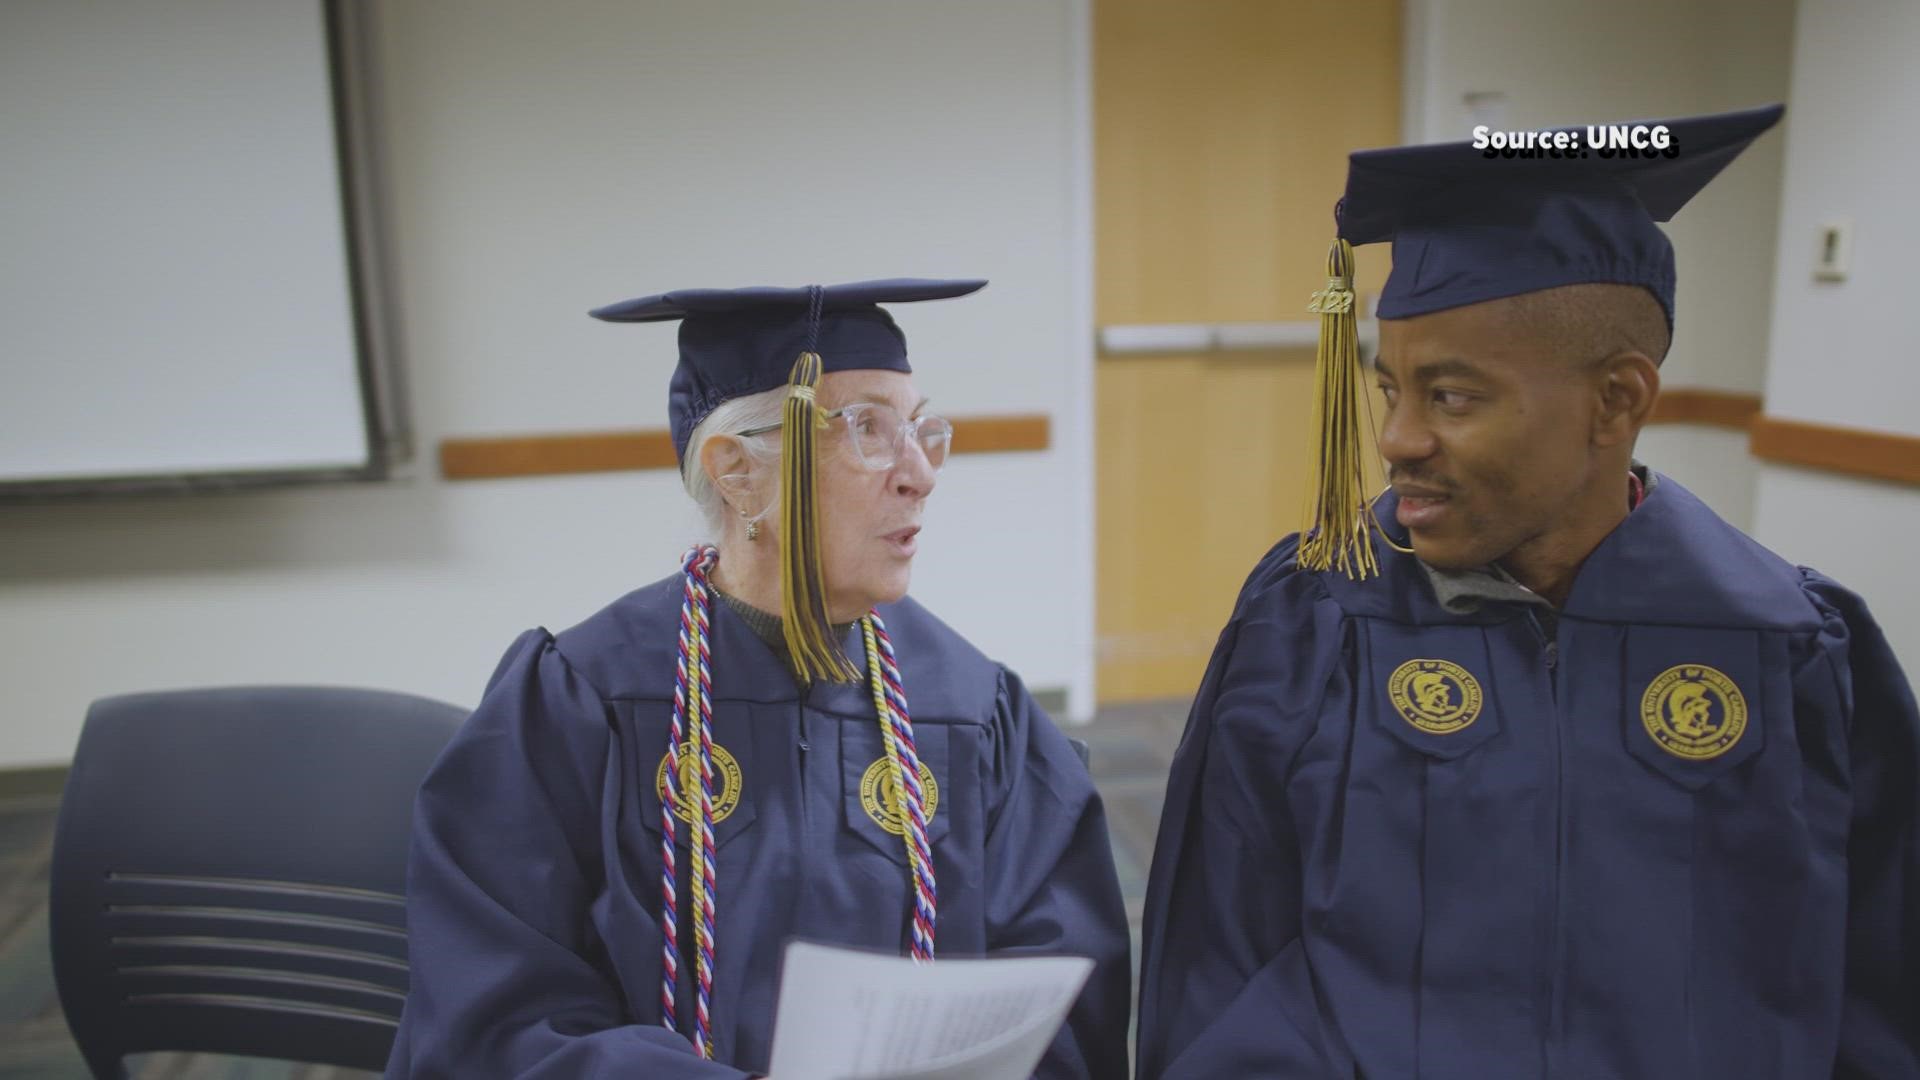 Bonnie Miller has two undergraduate degrees from UNCG, but they came 40 years apart